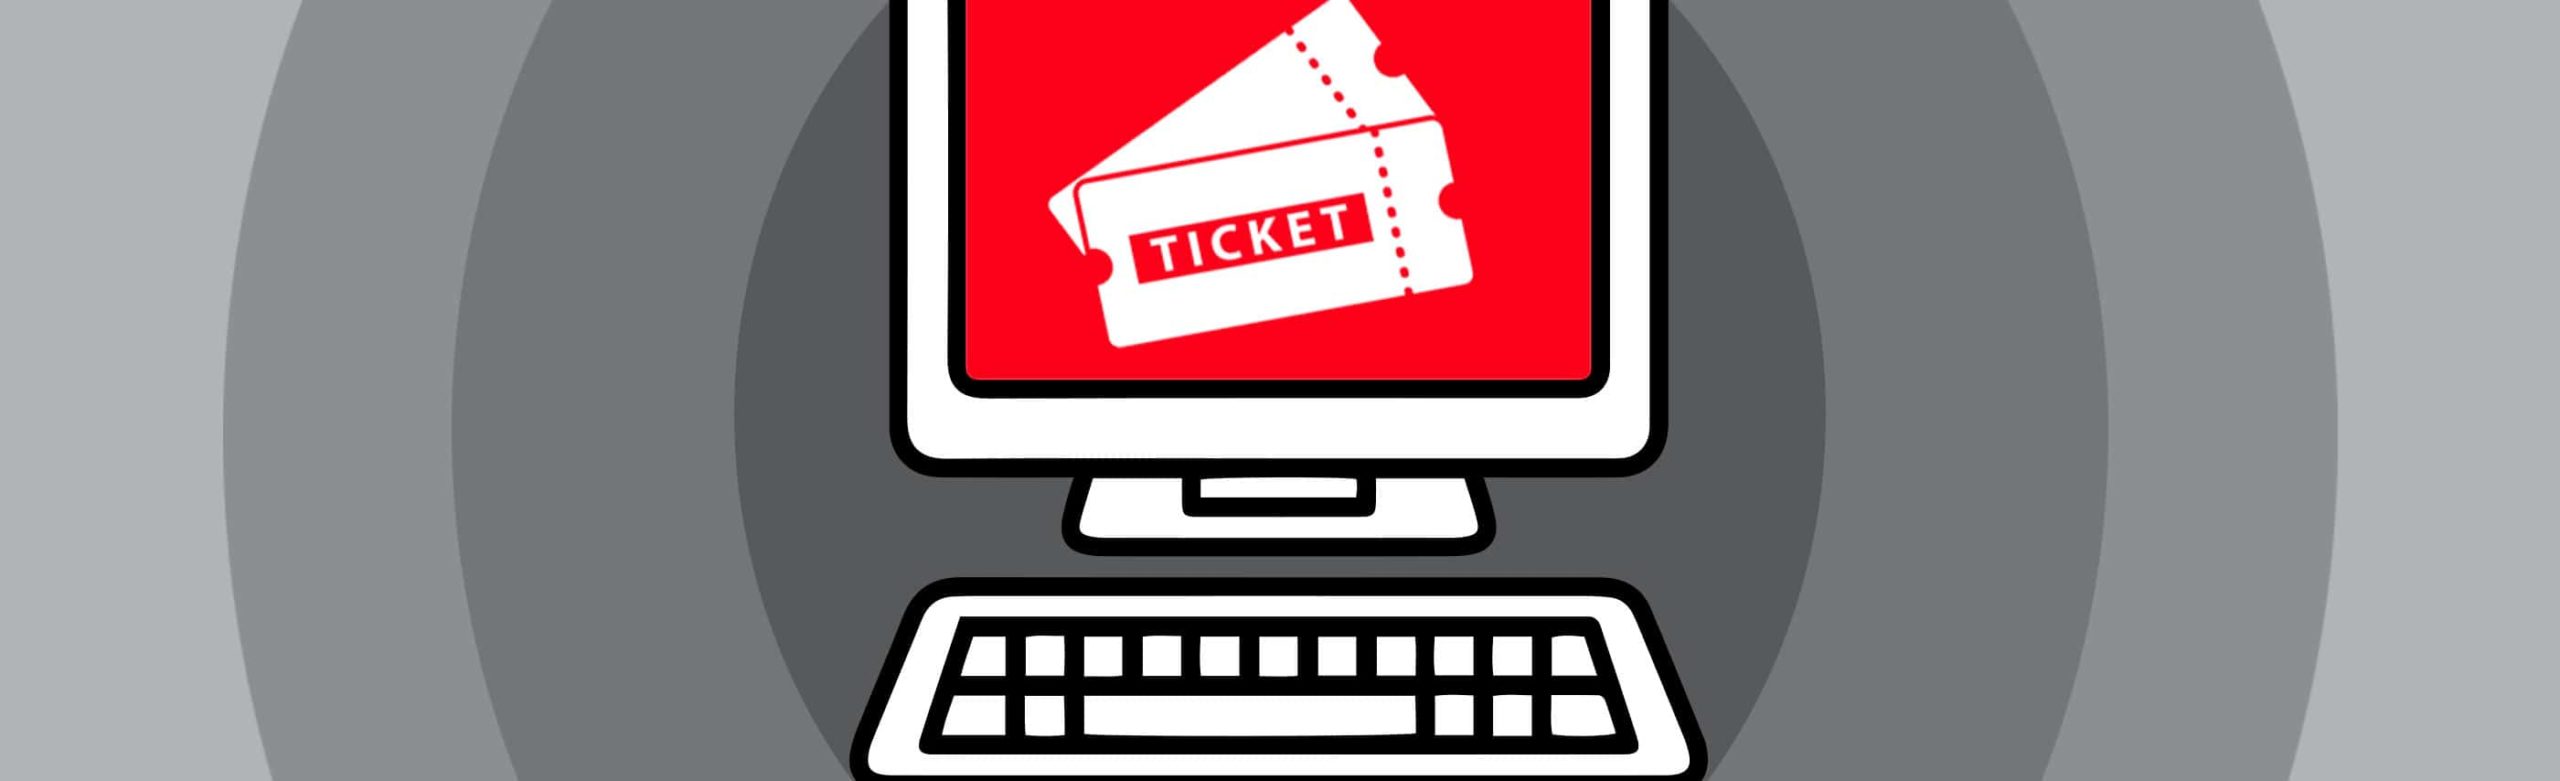 Avoid Scalpers: How to Safely & Securely Purchase Tickets to Logjam Events Image